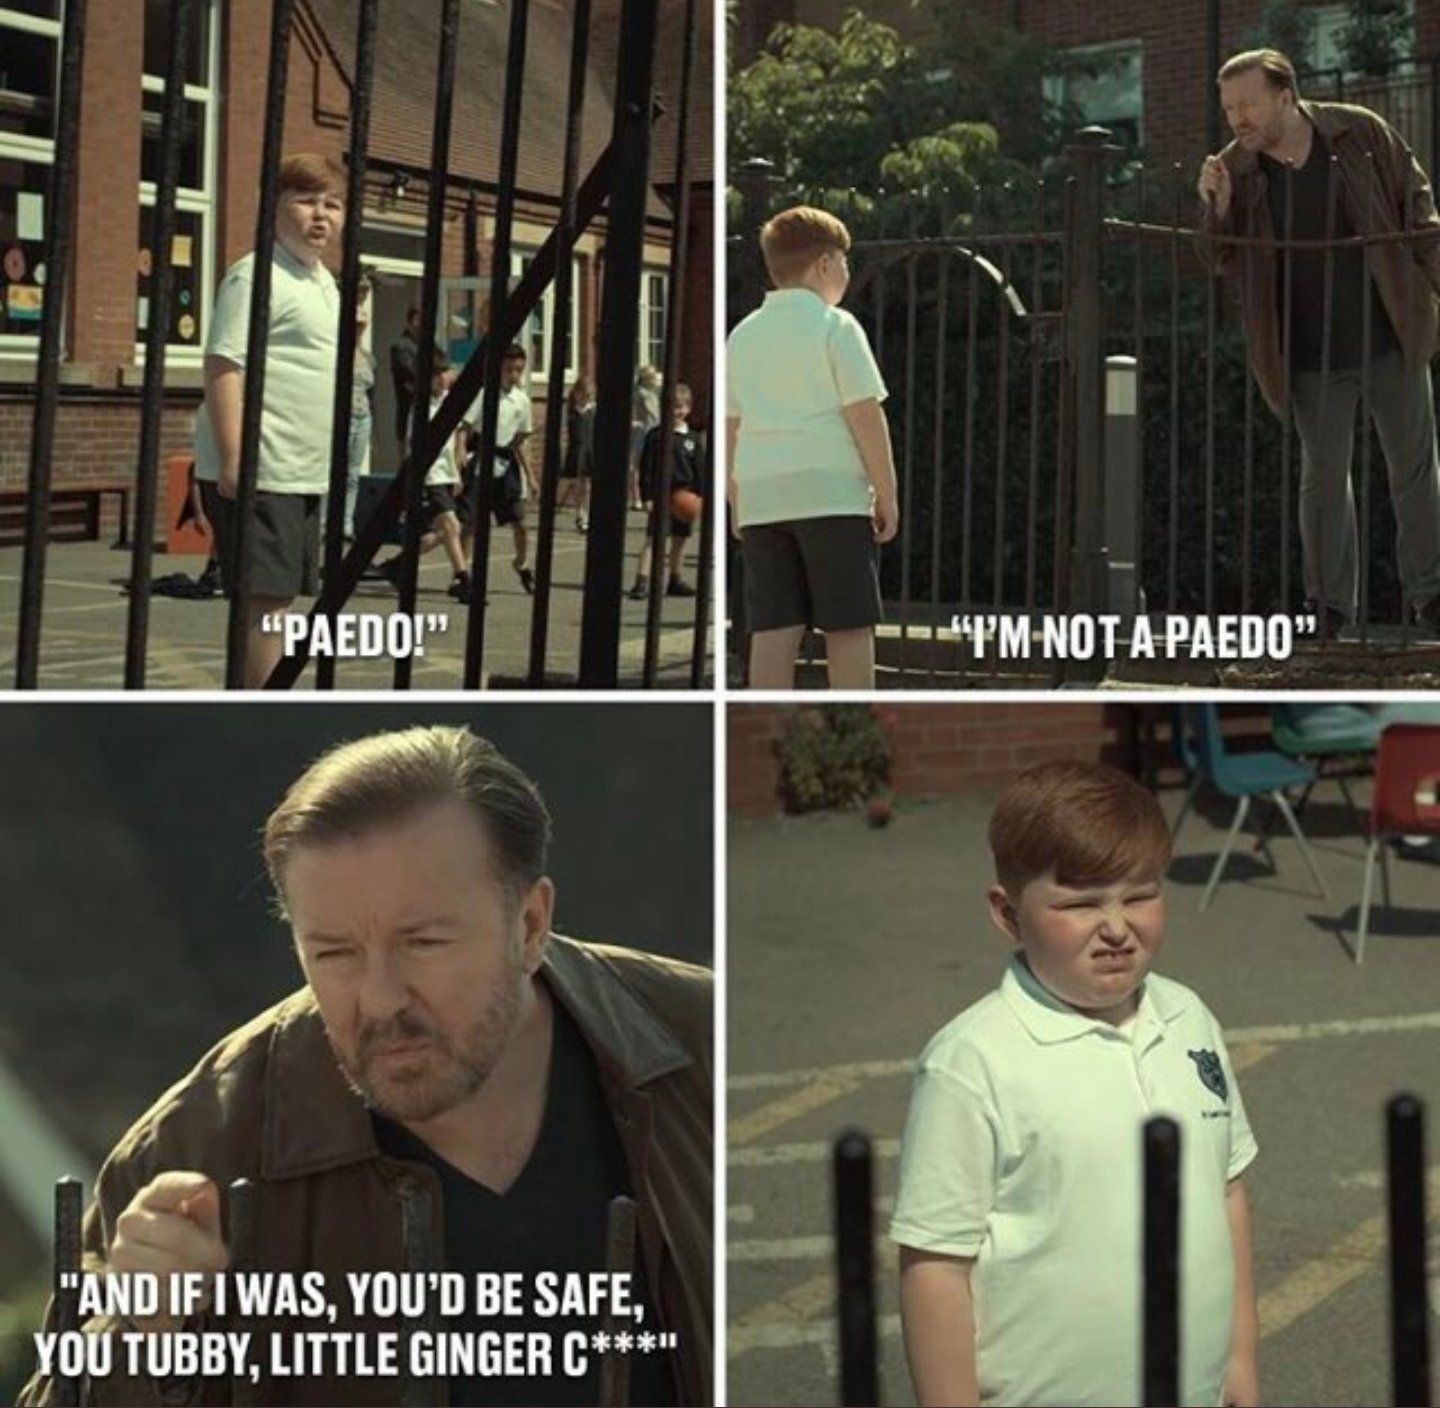 Ricky Gervais is a treasure